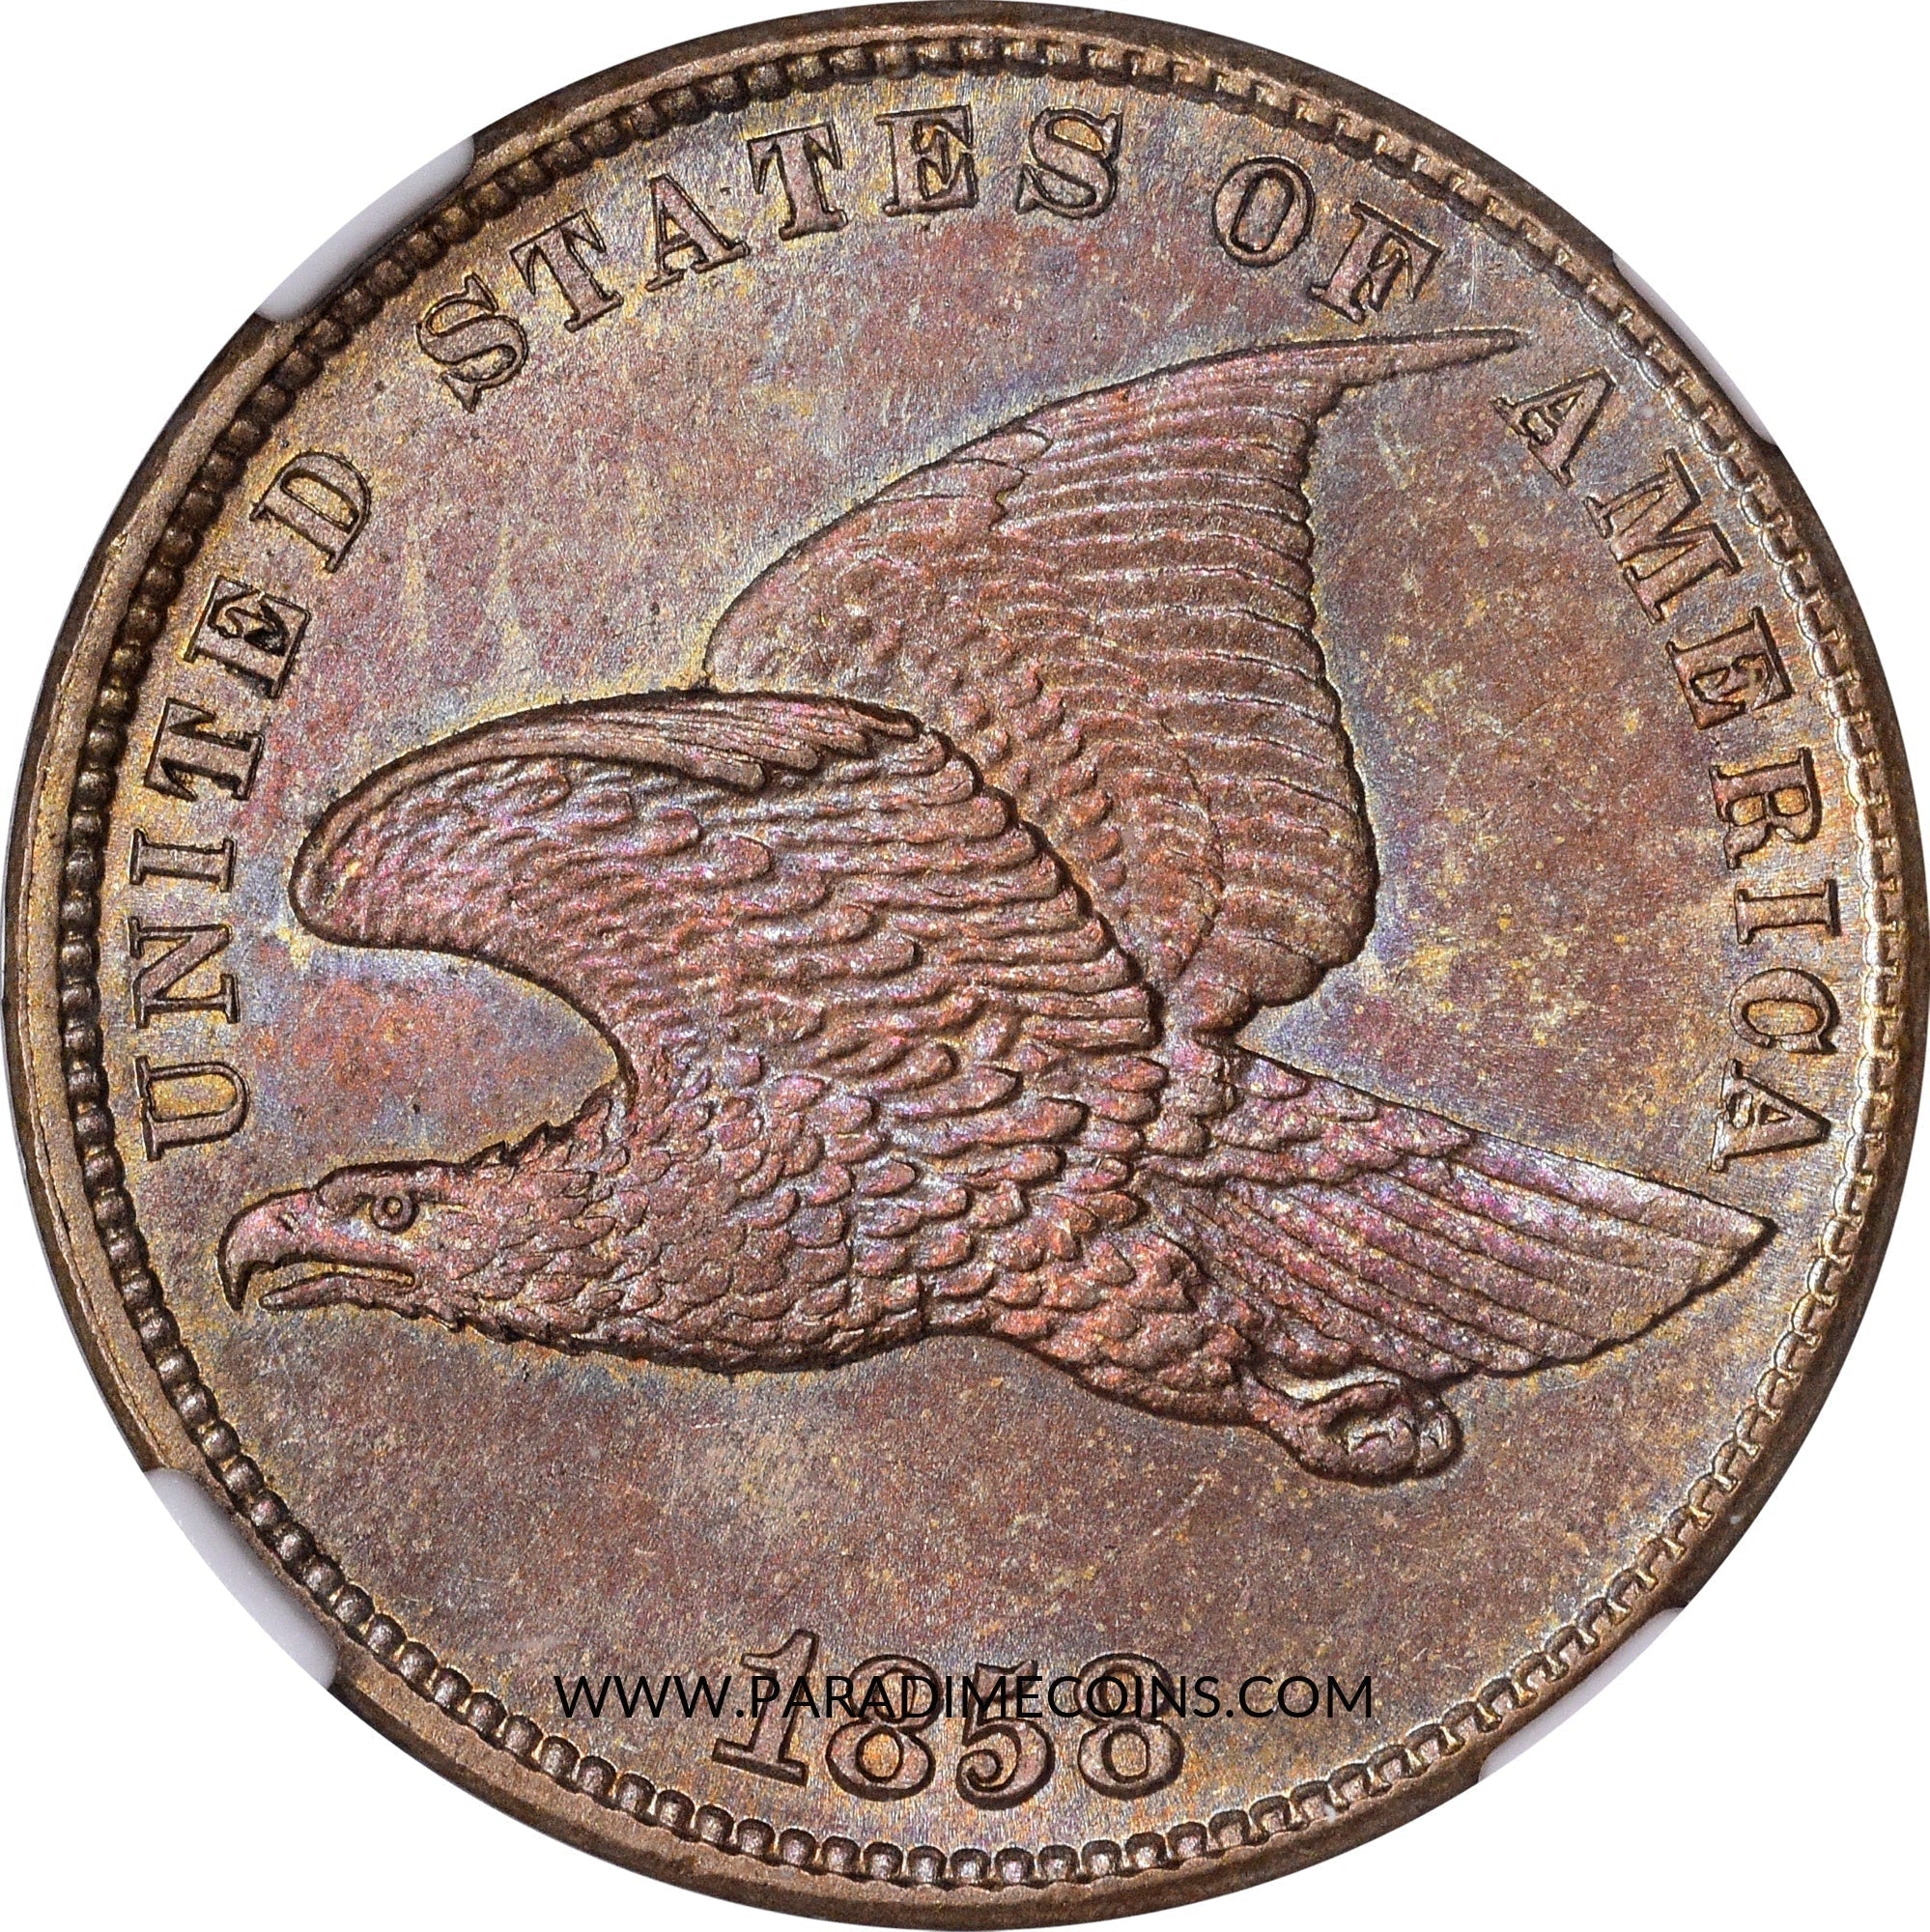 1858 1C SMALL LETTERS MS64 NGC PHOTO SEAL - Paradime Coins | PCGS NGC CACG CAC Rare US Numismatic Coins For Sale